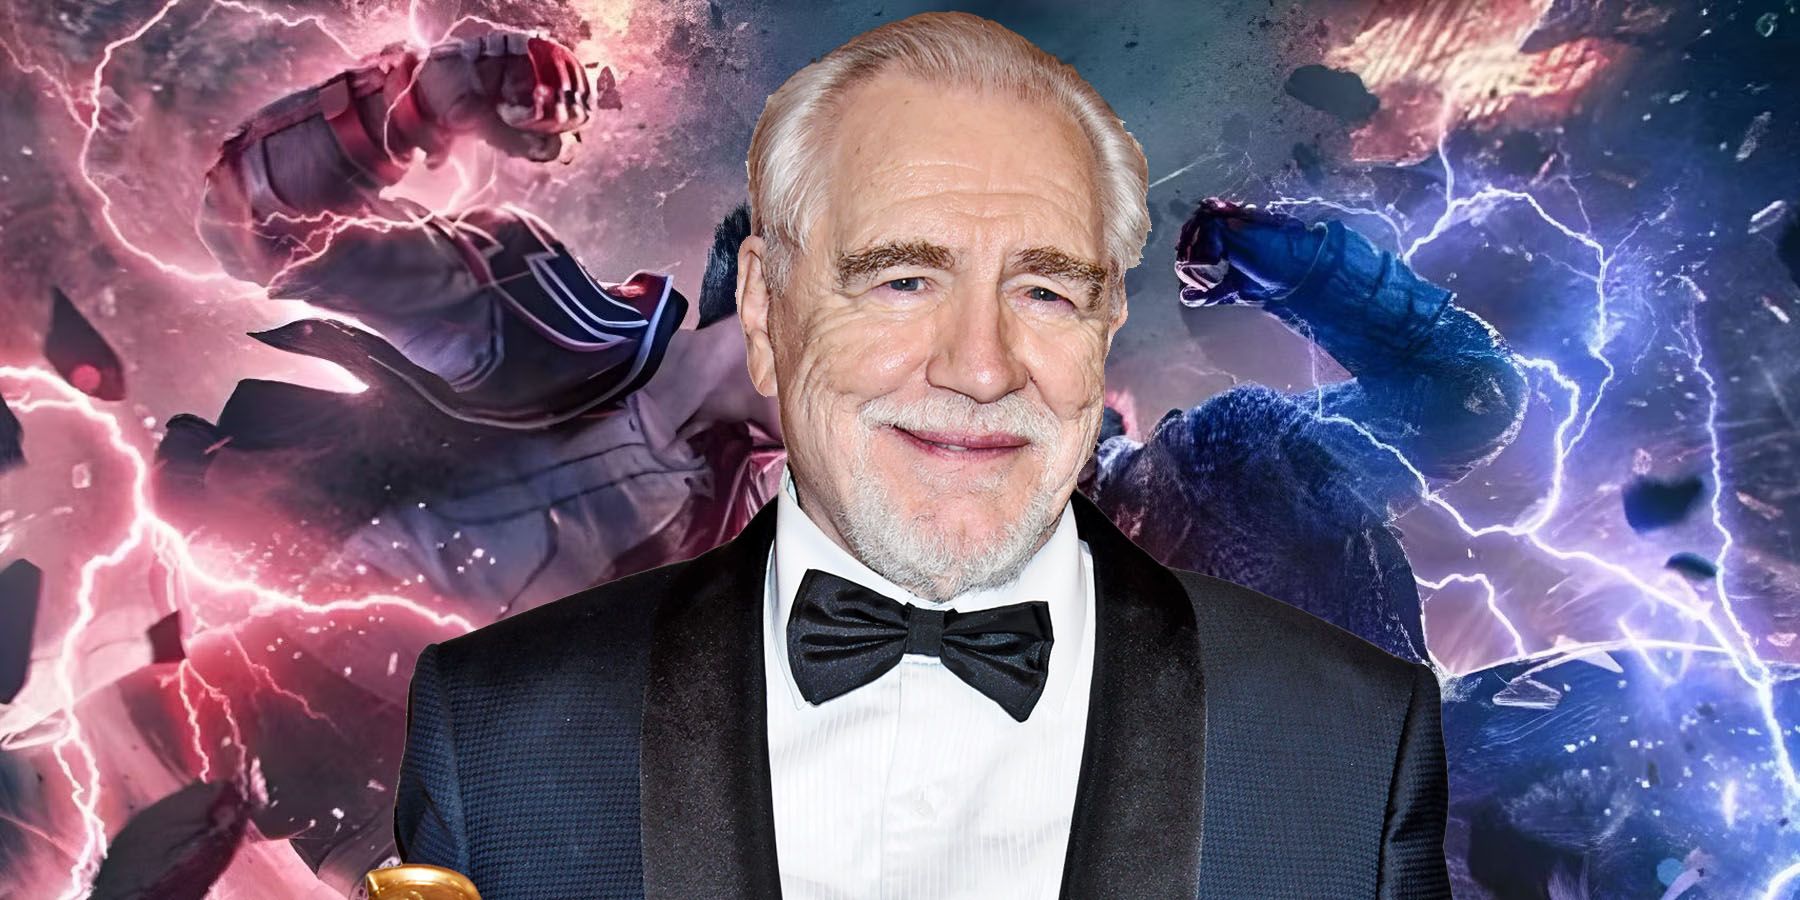 An image of Succession star Brian Cox inserted into a promotional shot of Kazuay and Jin fighting in Tekken 8.